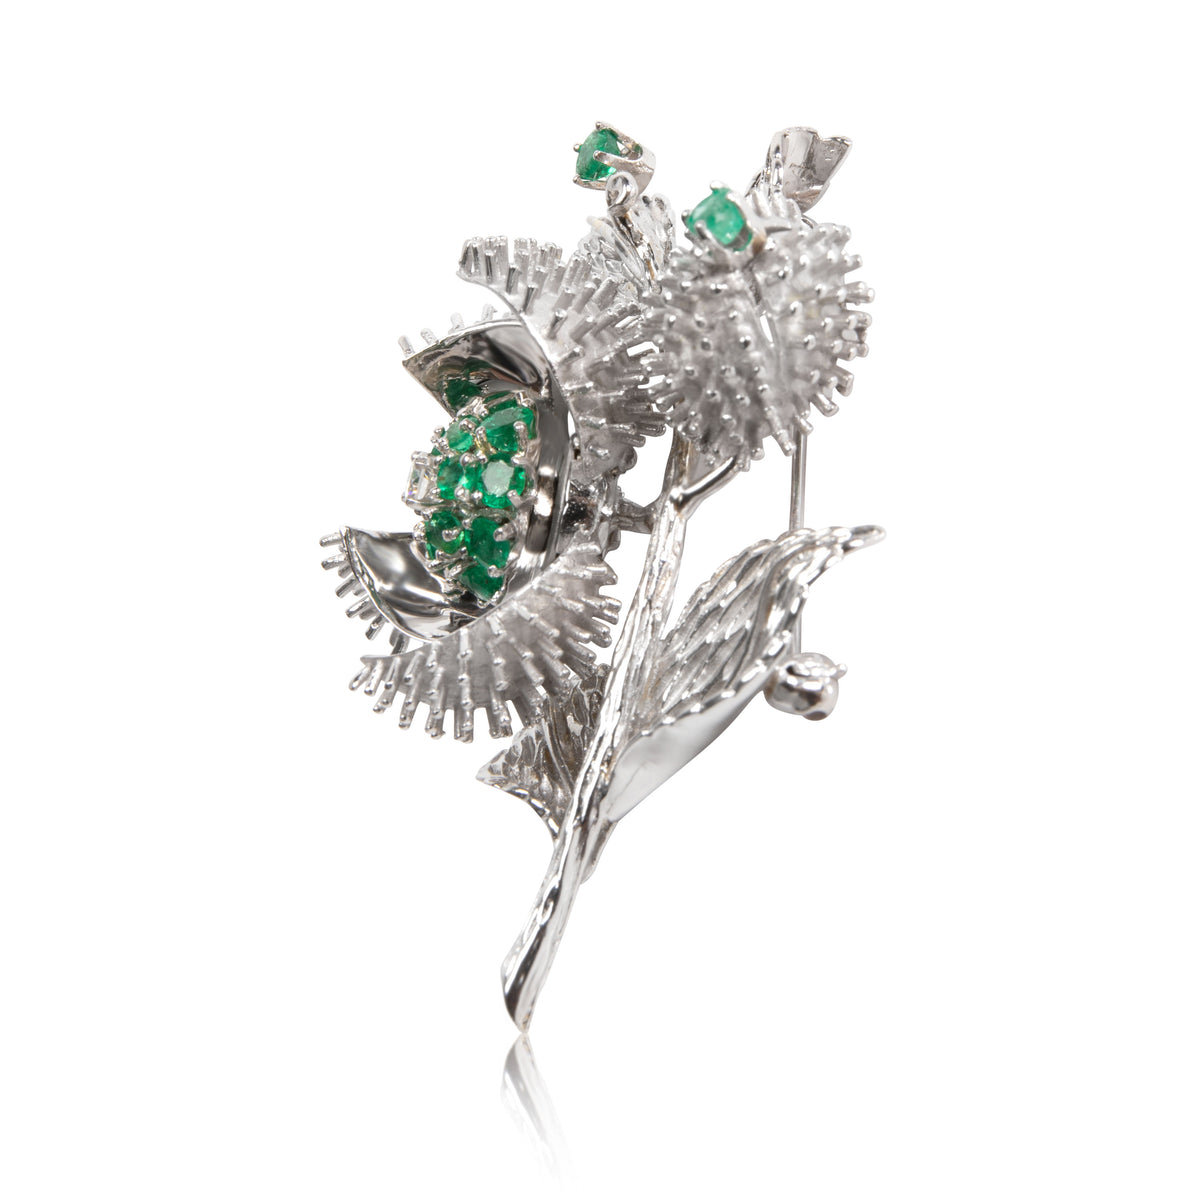 Tiffany & Co. Articulating Cactus Diamond Brooch in 18K White Gold 0.12 CTW